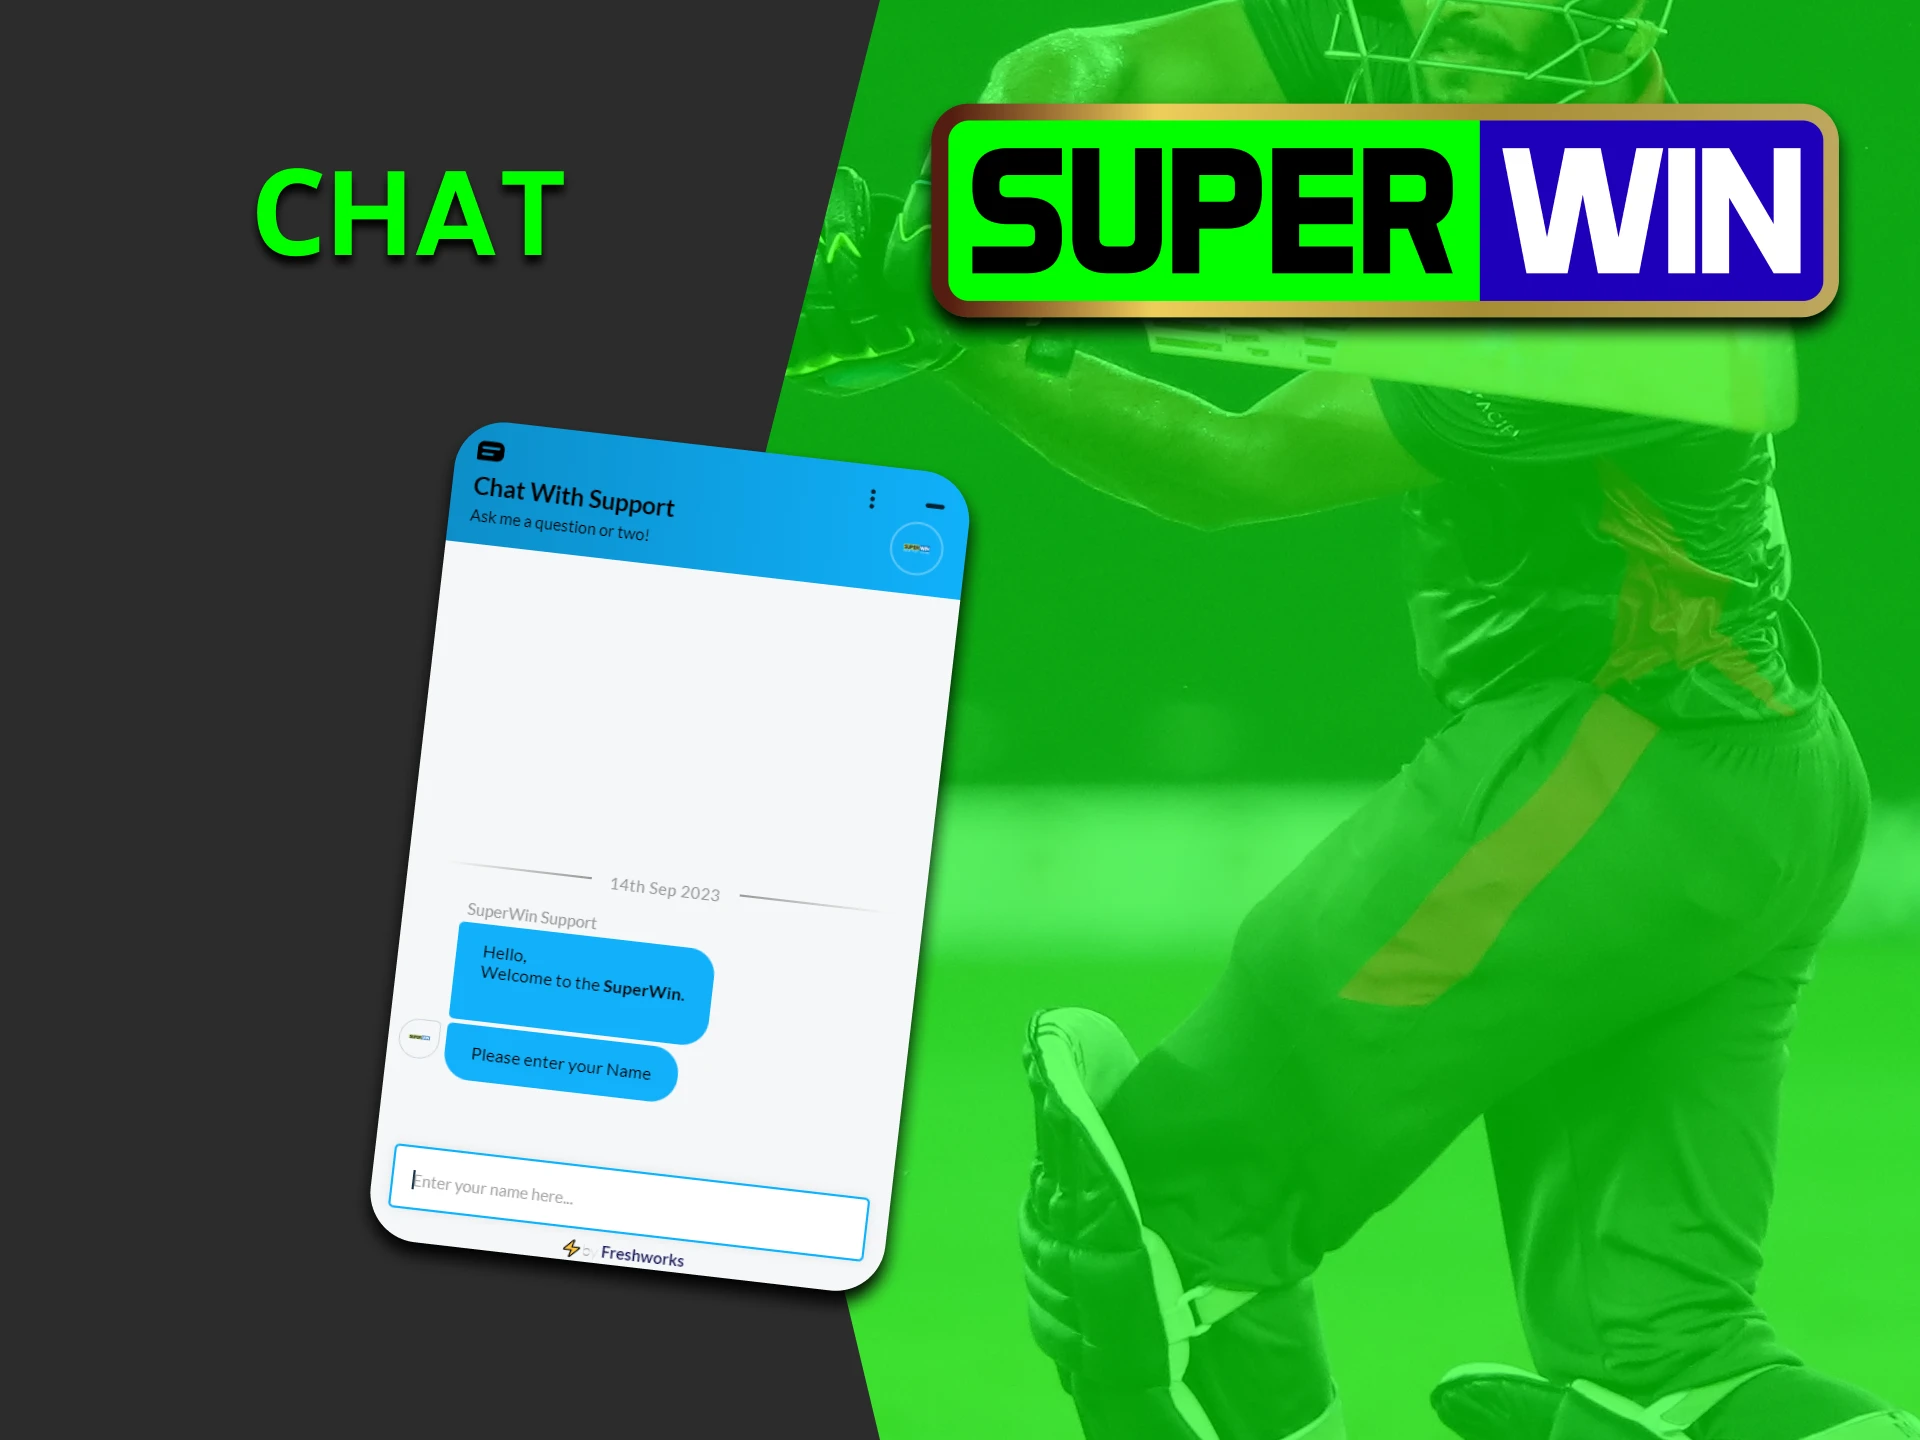 You can contact the Superwin team via Chat.